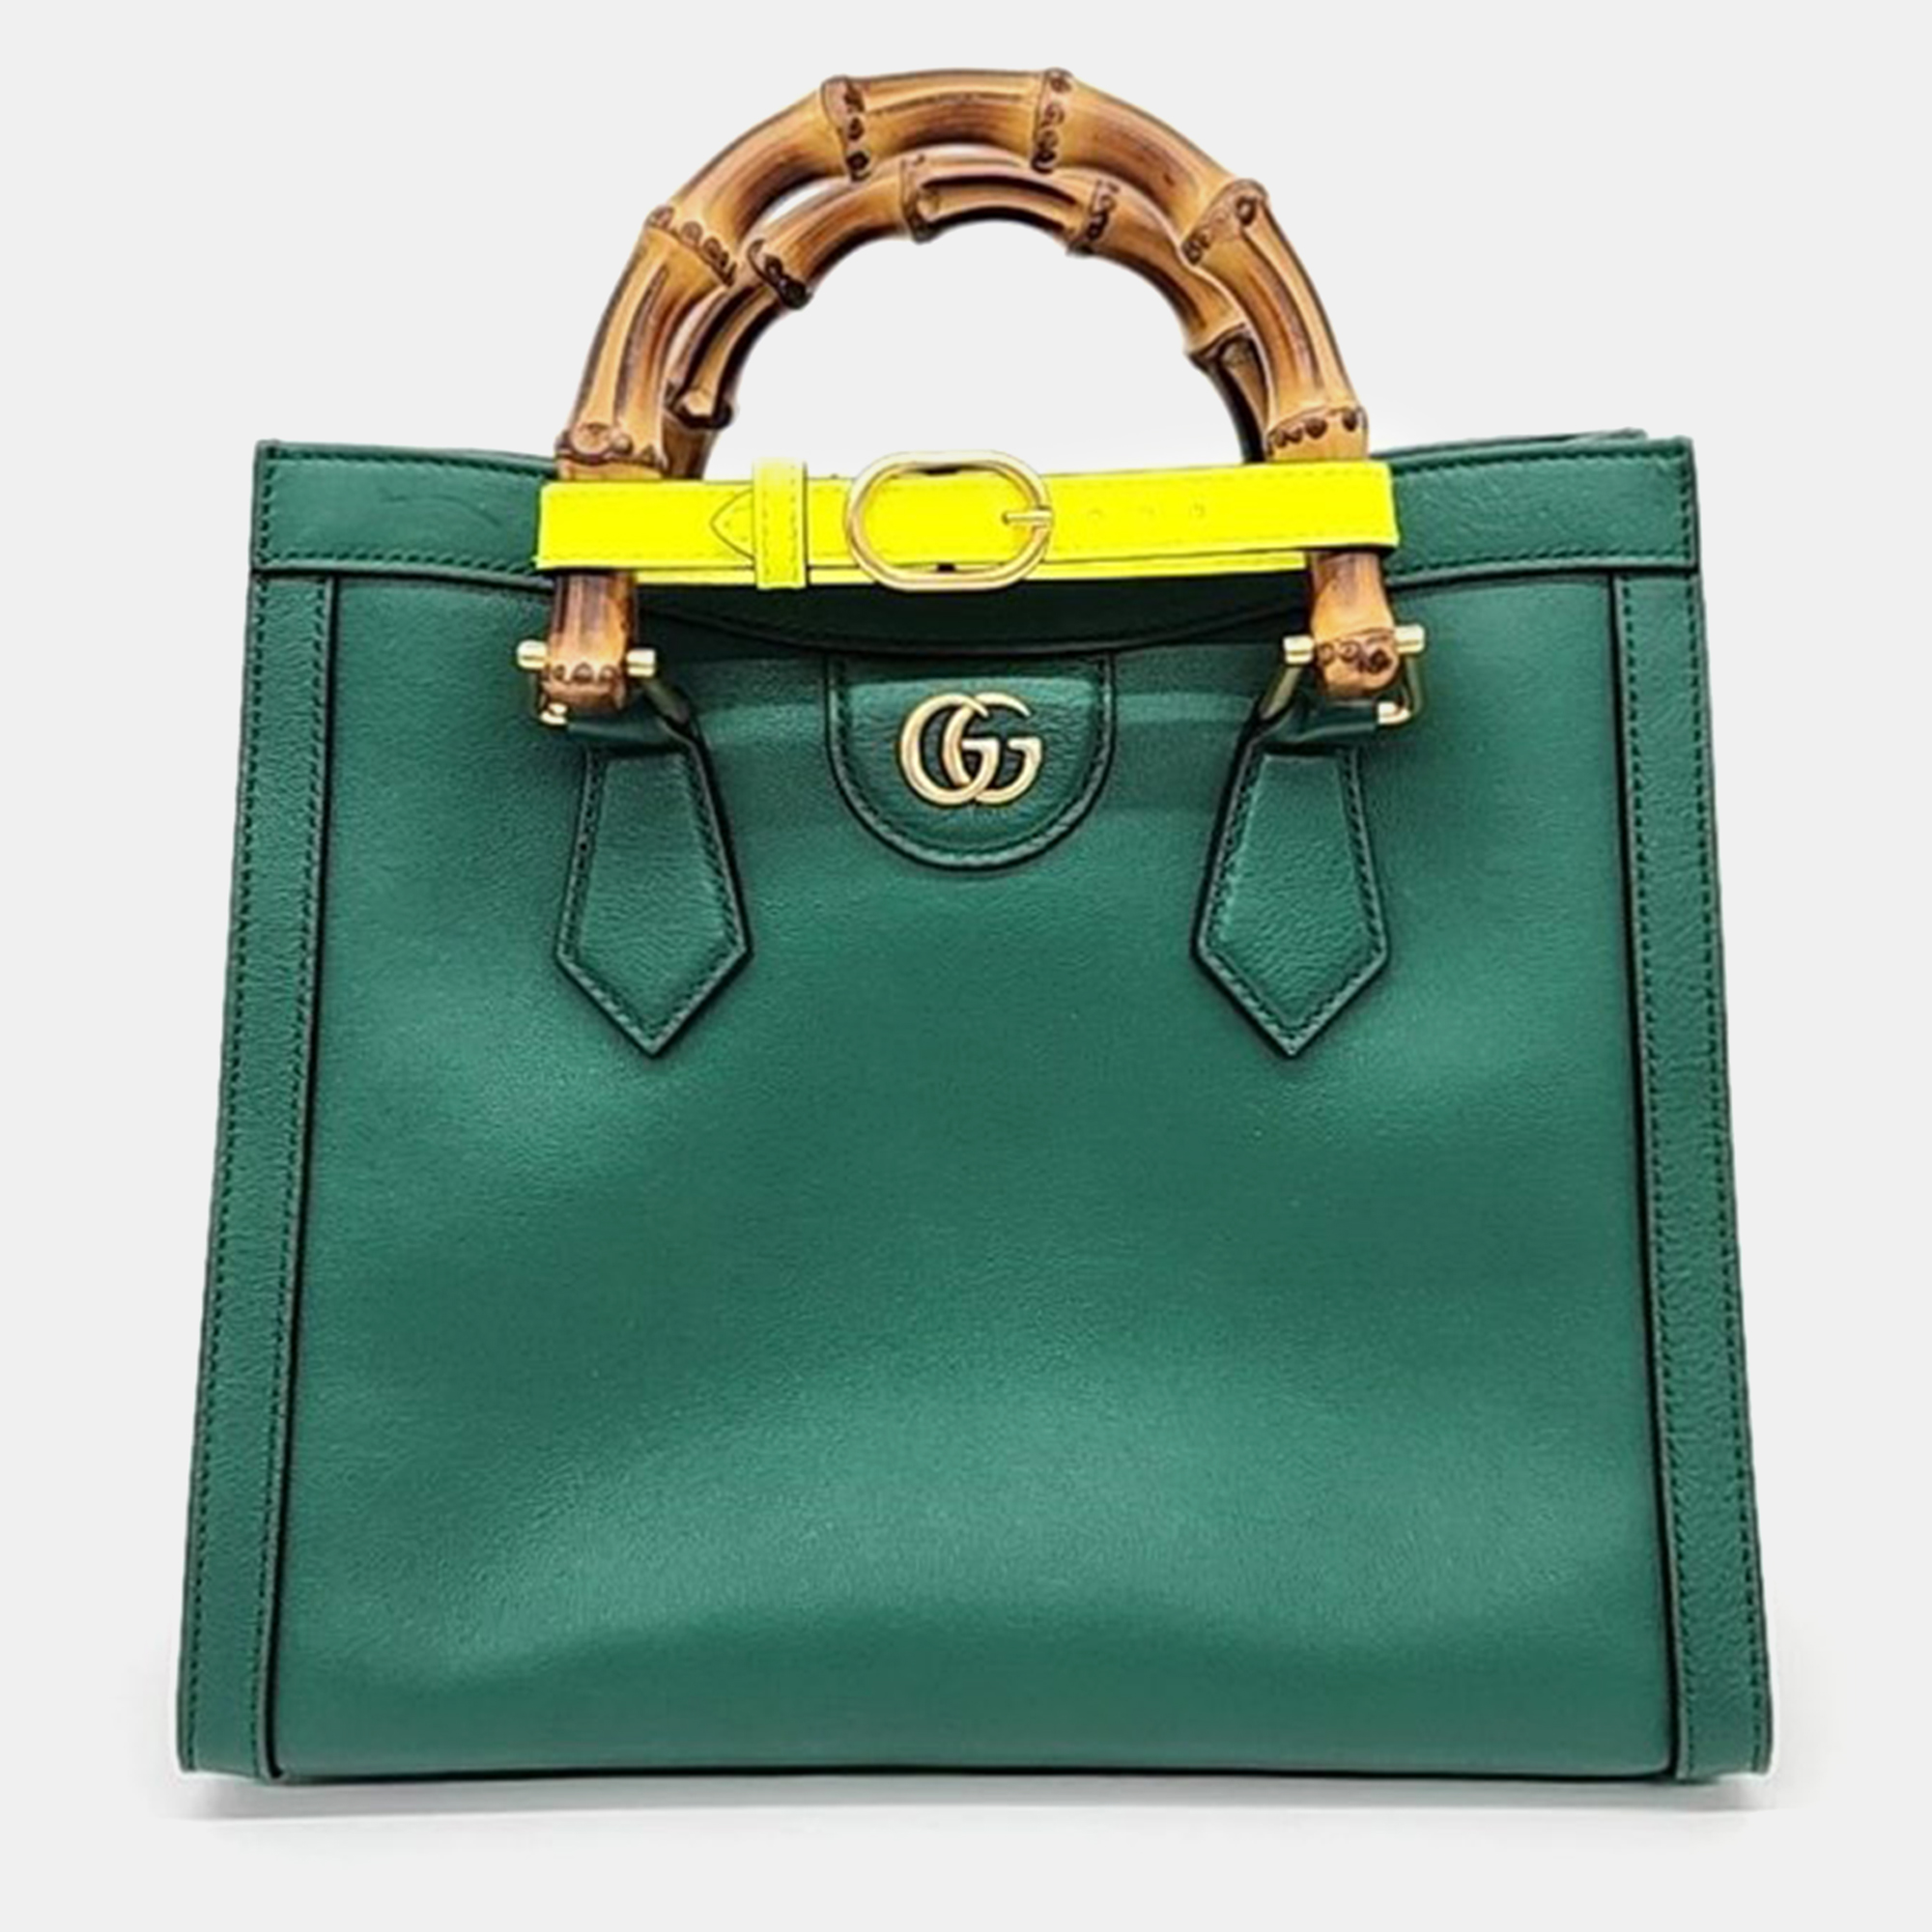 Gucci green leather small diana bamboo tote bag